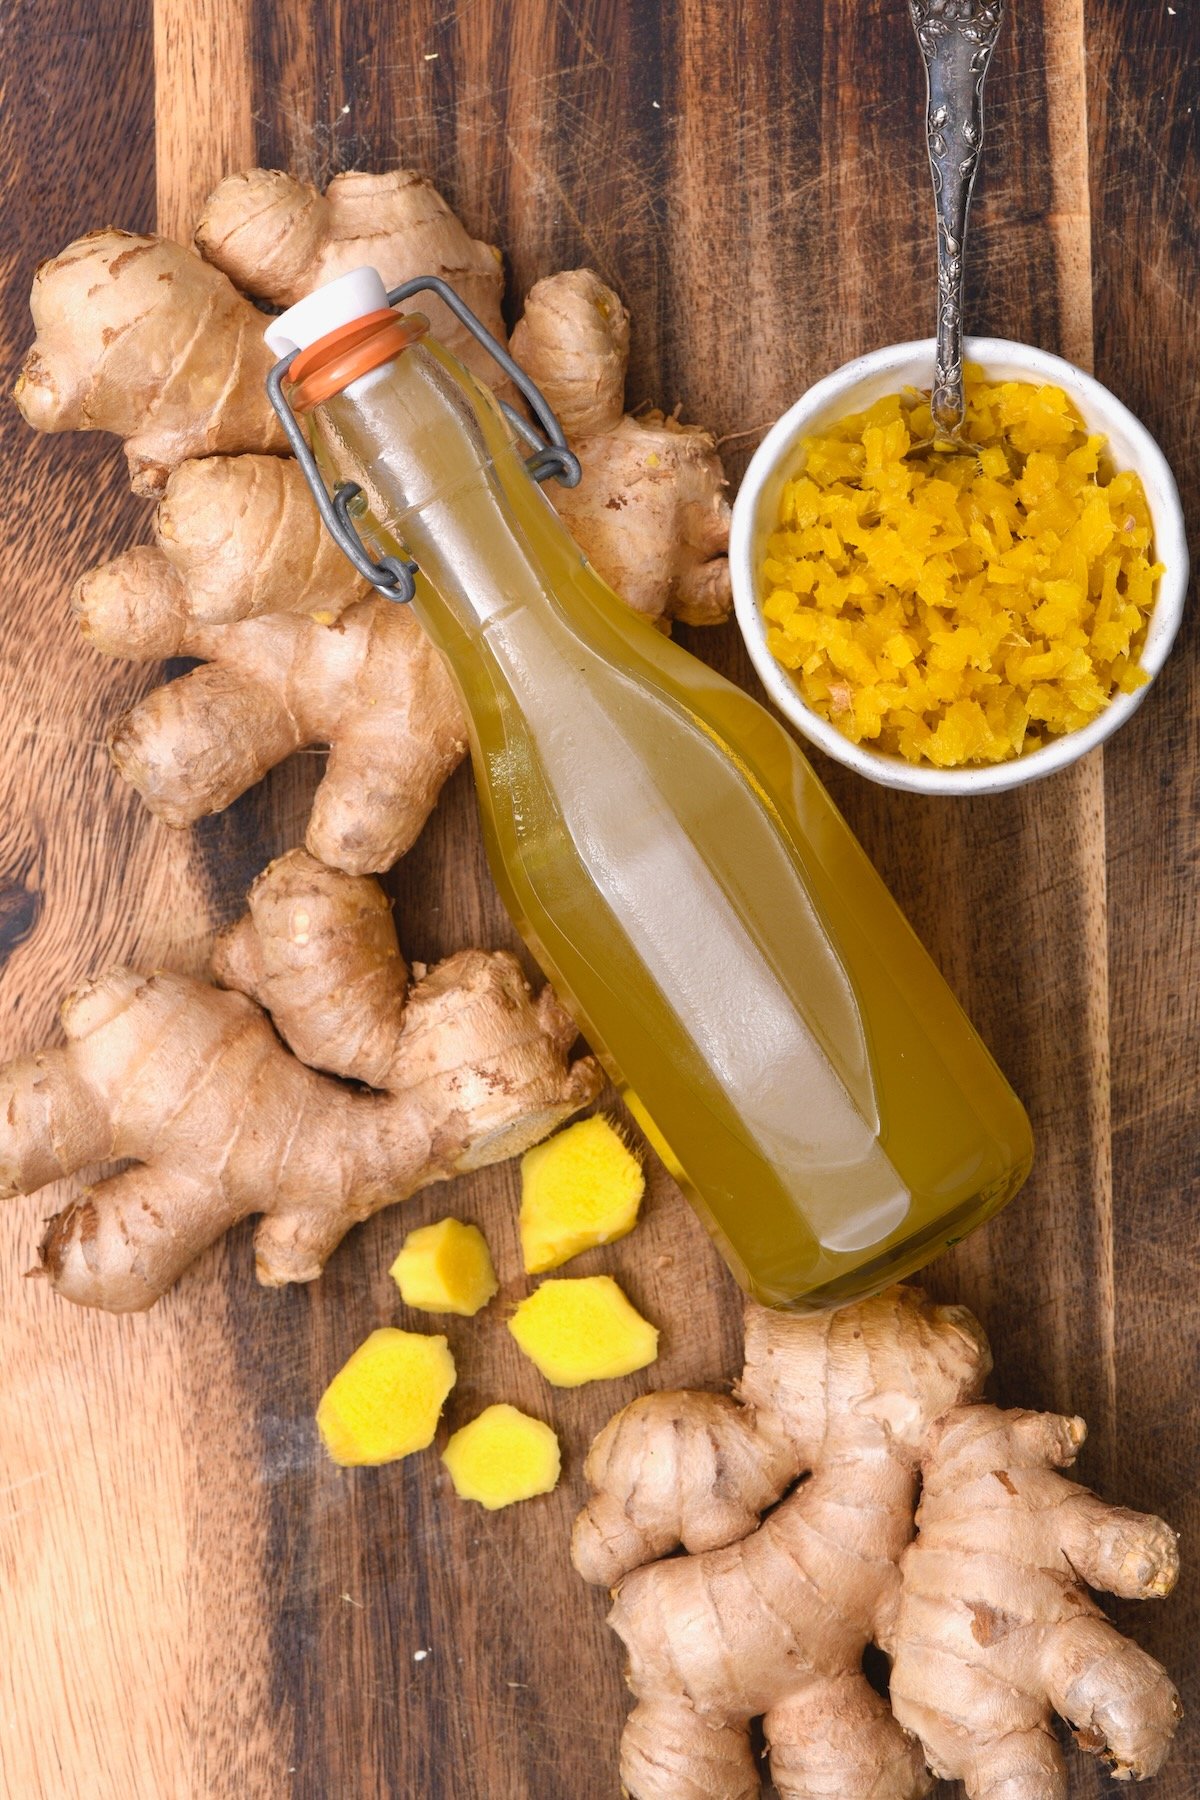 A bottle of homemade ginger syrup with ginger pulp and ginger root next to it